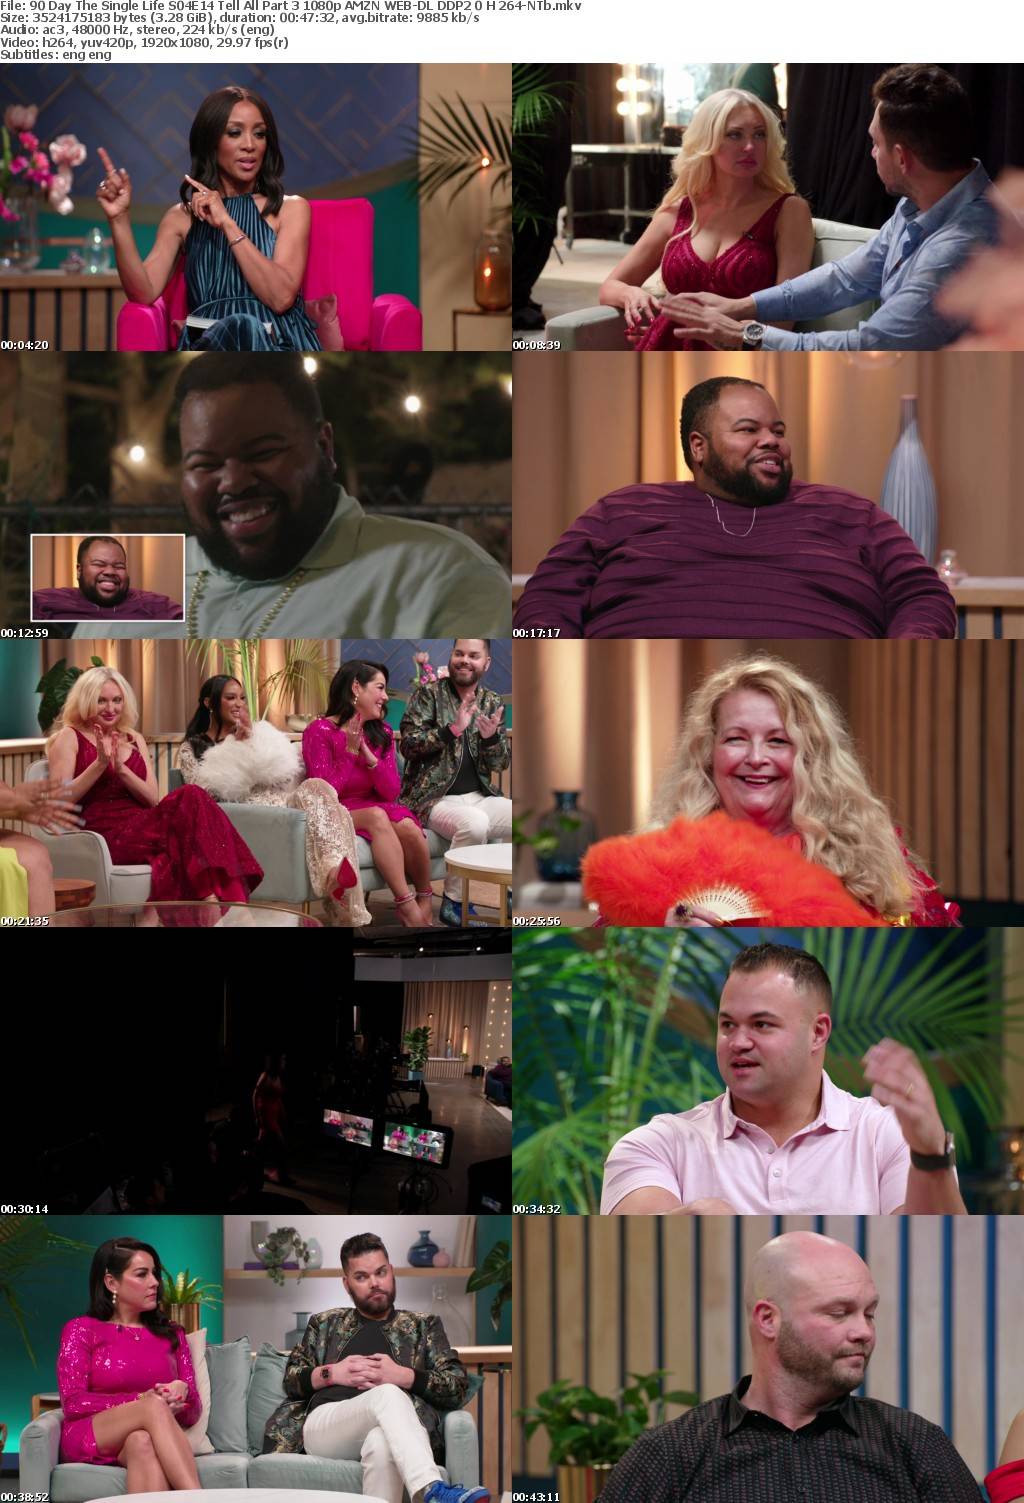 90 Day The Single Life S04E14 Tell All Part 3 1080p AMZN WEB-DL DDP2 0 H 264-NTb